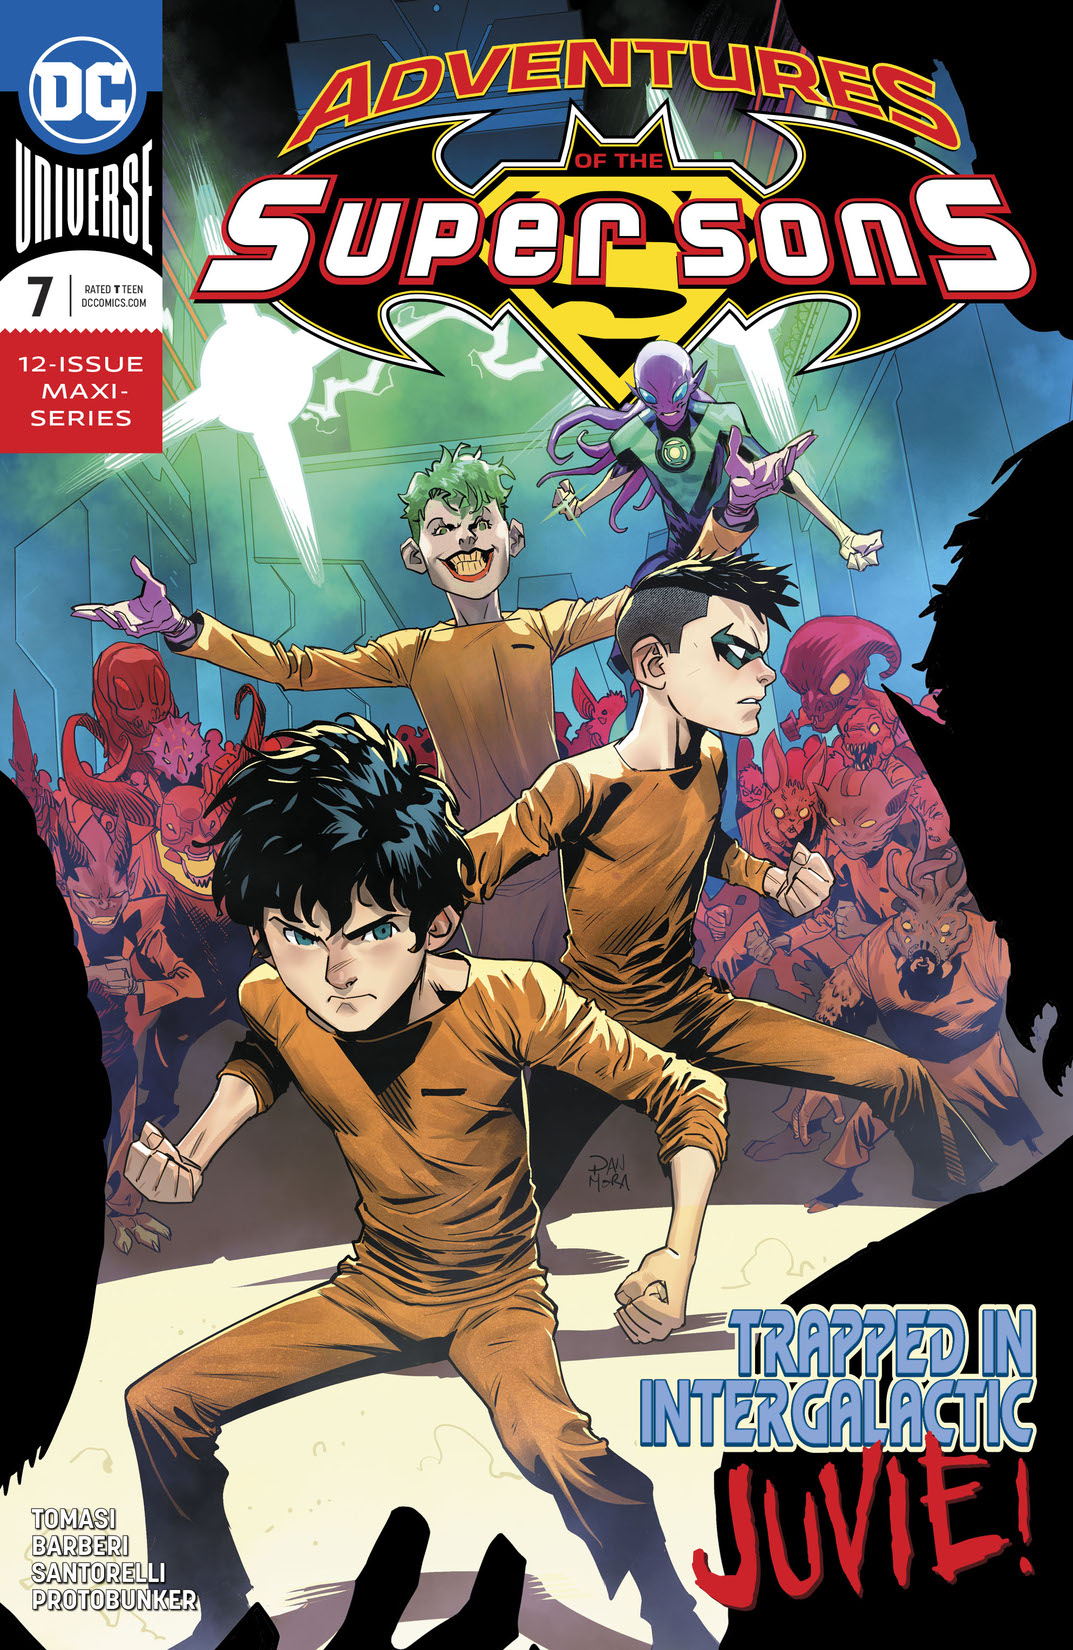 Adventures of the Super Sons #7 preview images